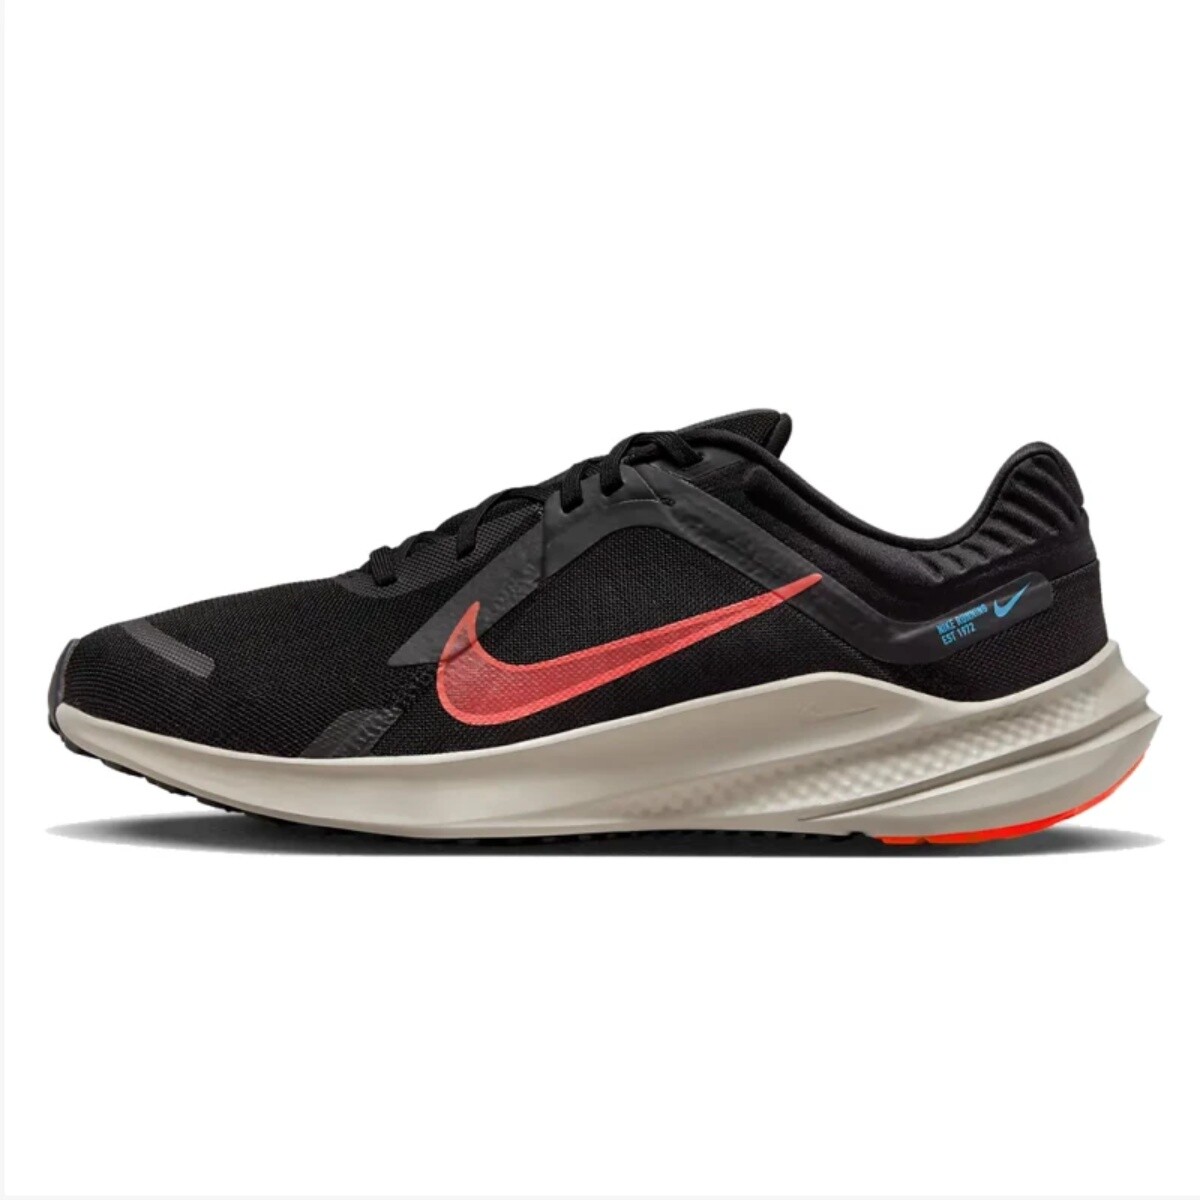 Champion Nike Running Hombre Quest 5 Black - S/C 